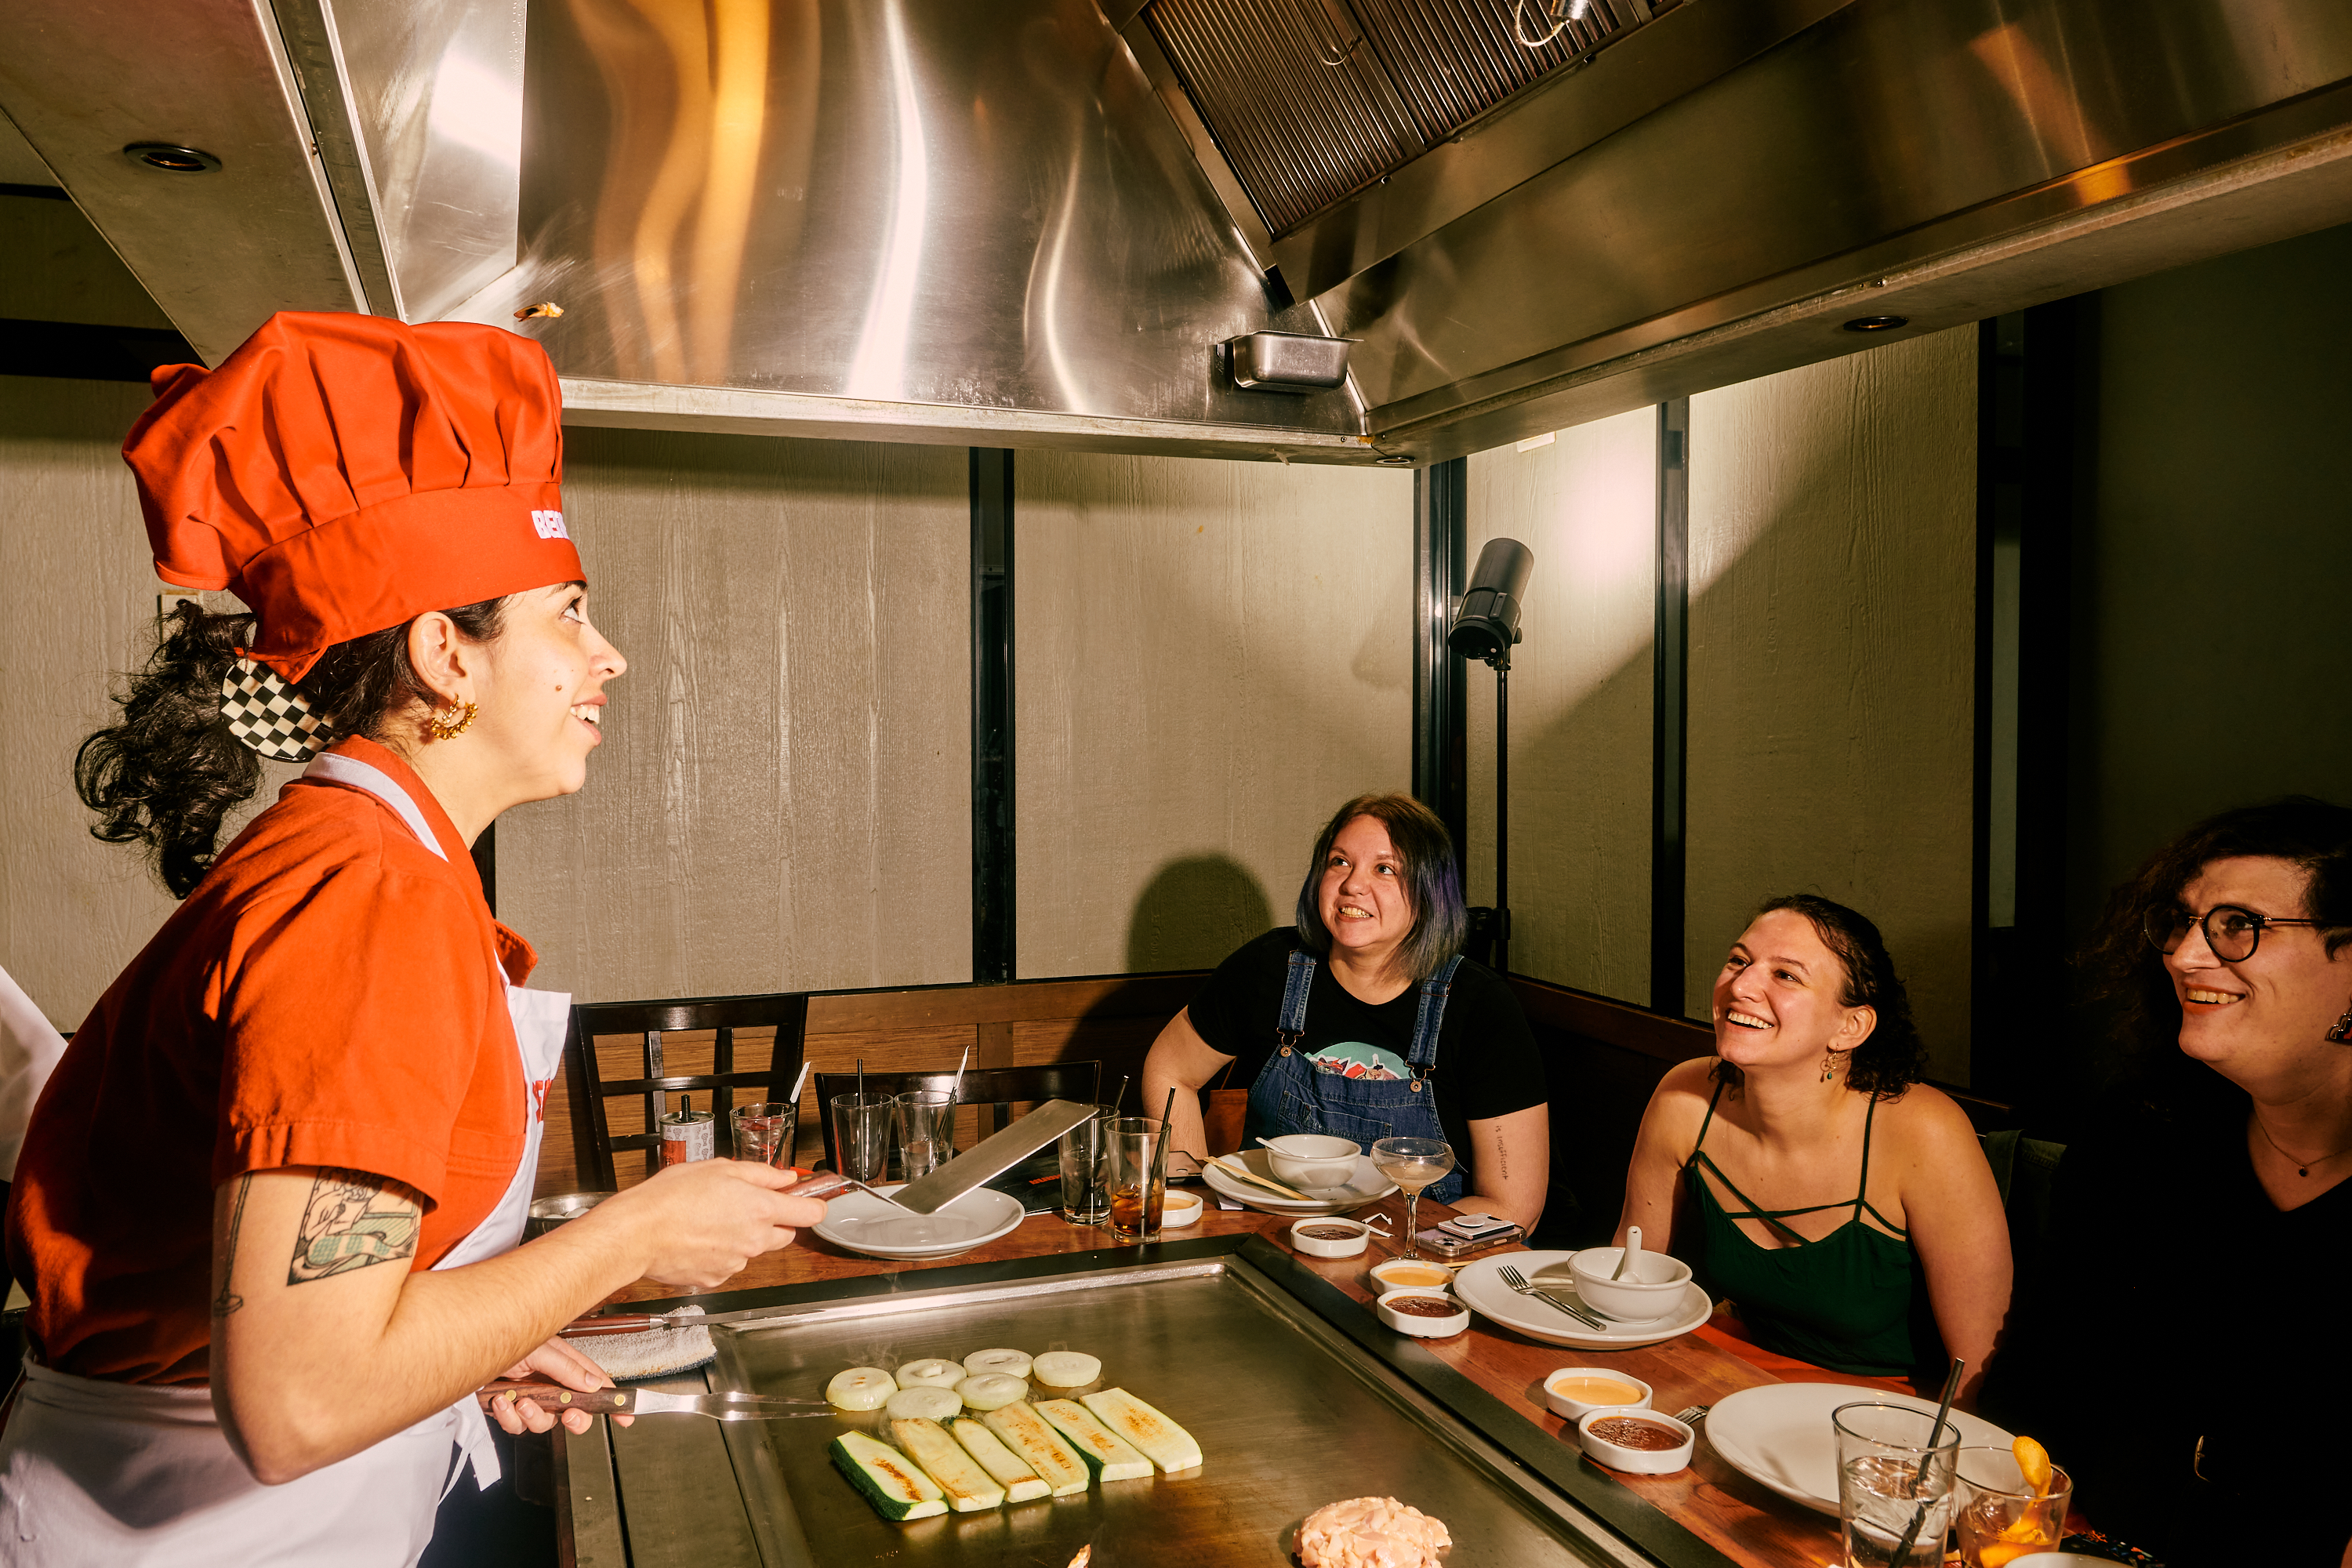 Jaya, standing behind Benihana’s grill, flips a shrimp tail into her chef’s hat as her friends look on, smiling.